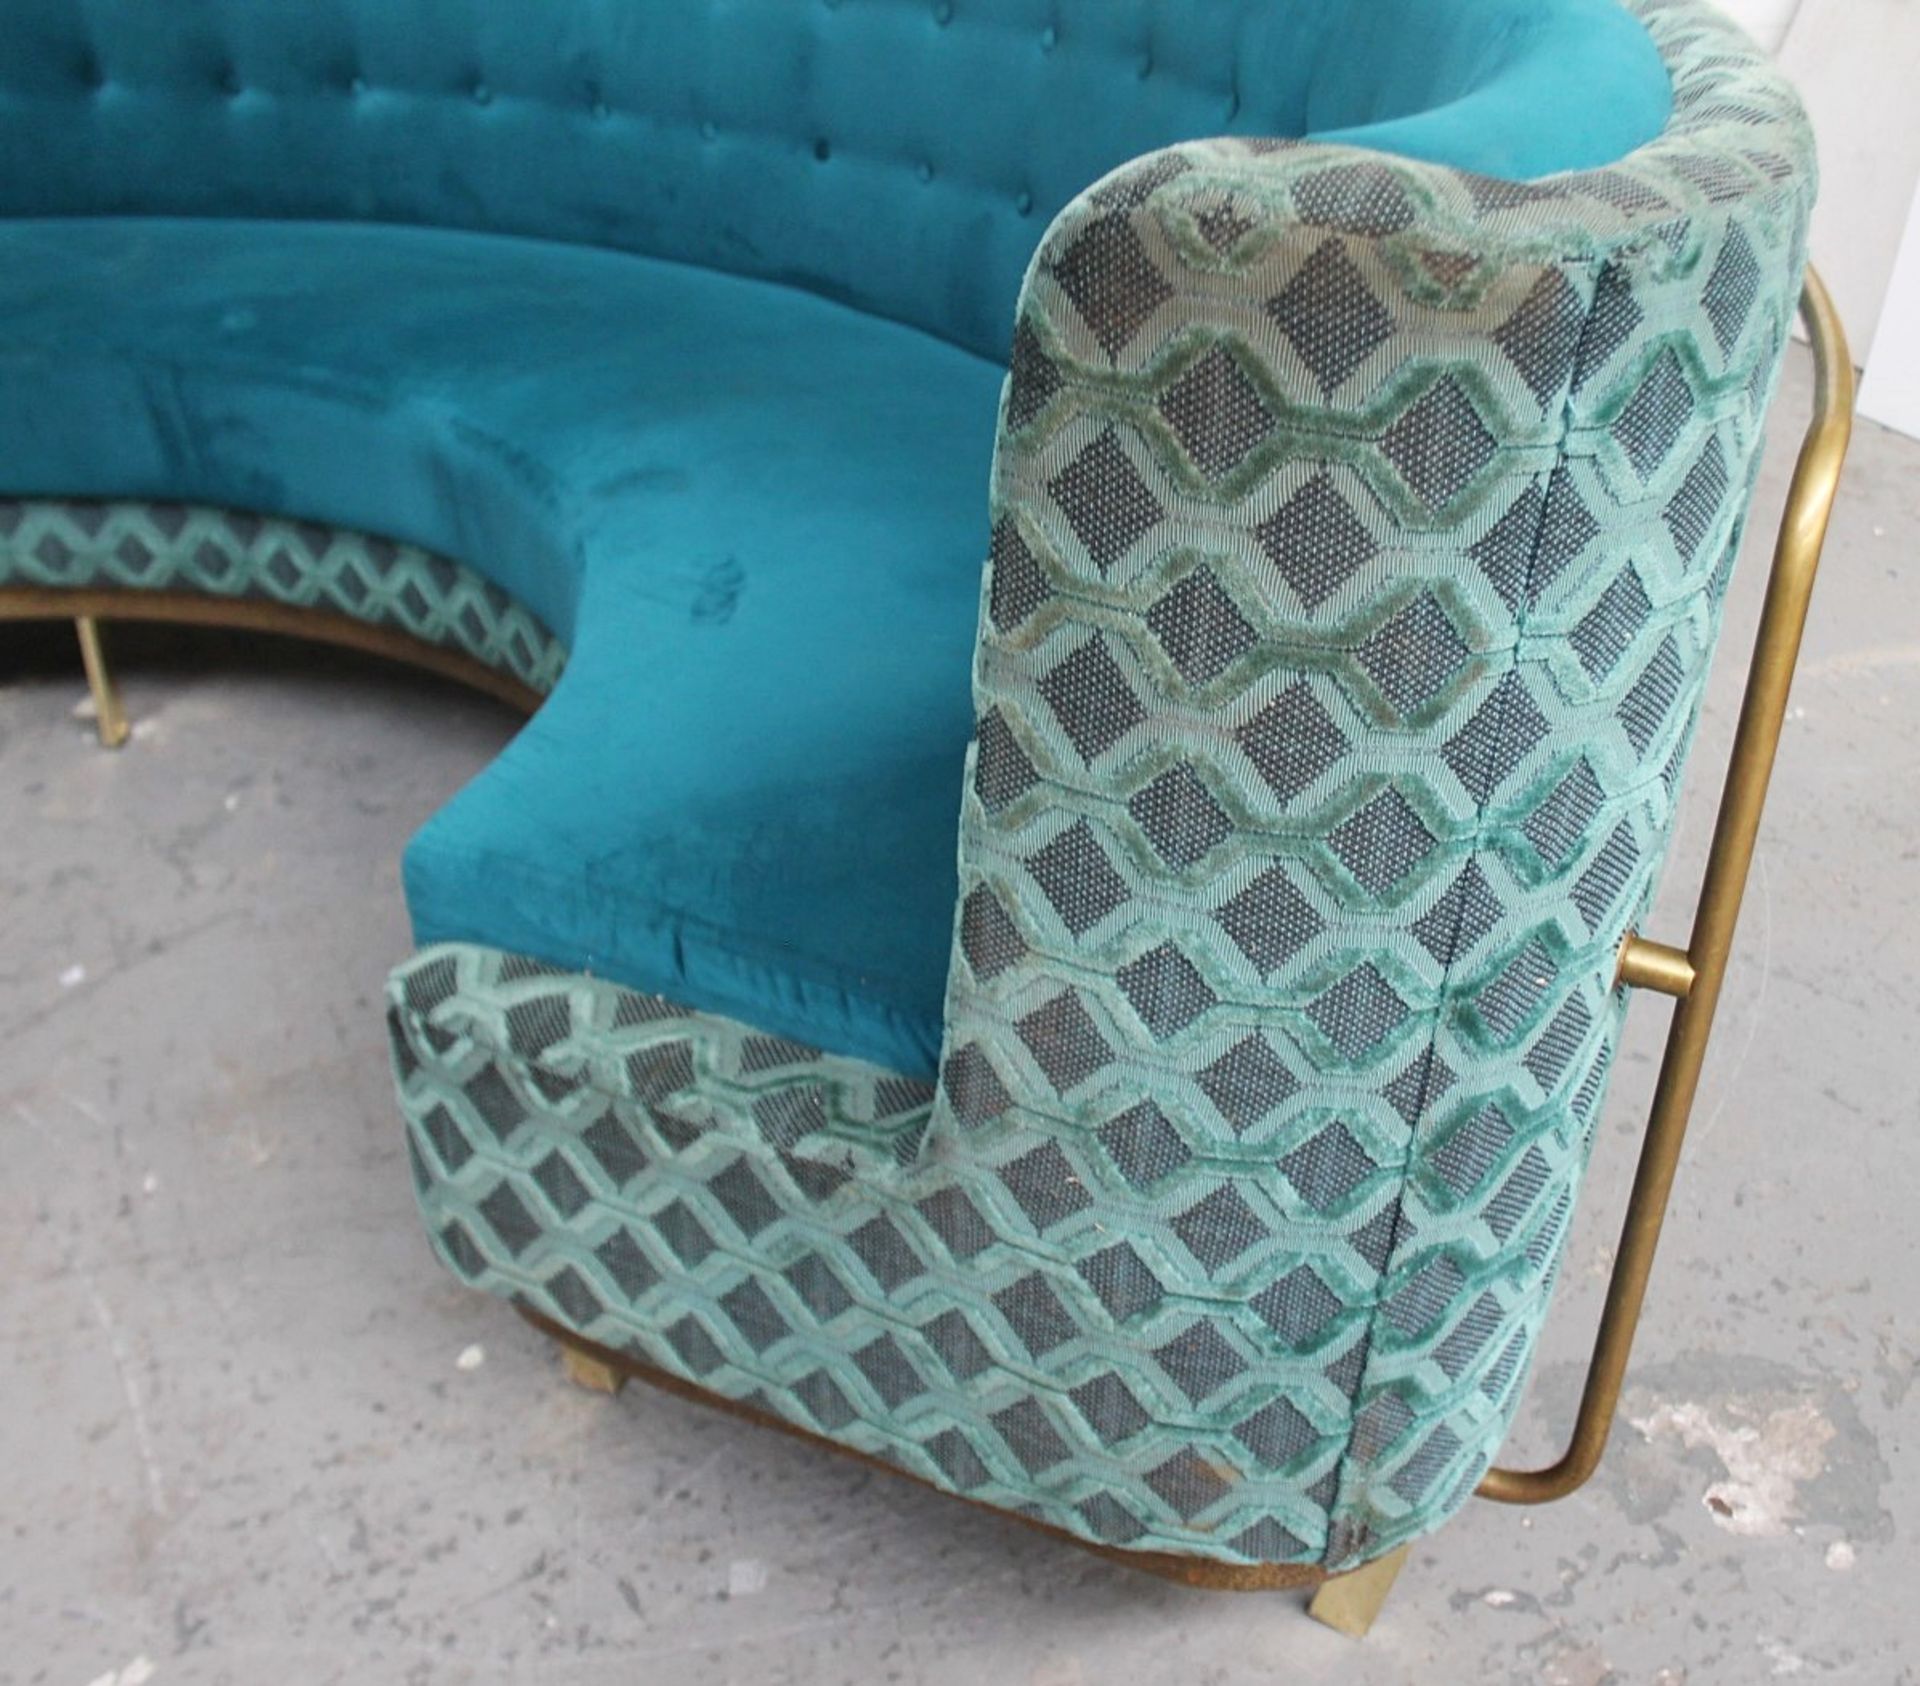 1 x Bespoke Commercial Curved C-Shaped Booth Seating Upholstered In Premium Teal Coloured Fabrics - - Image 9 of 17